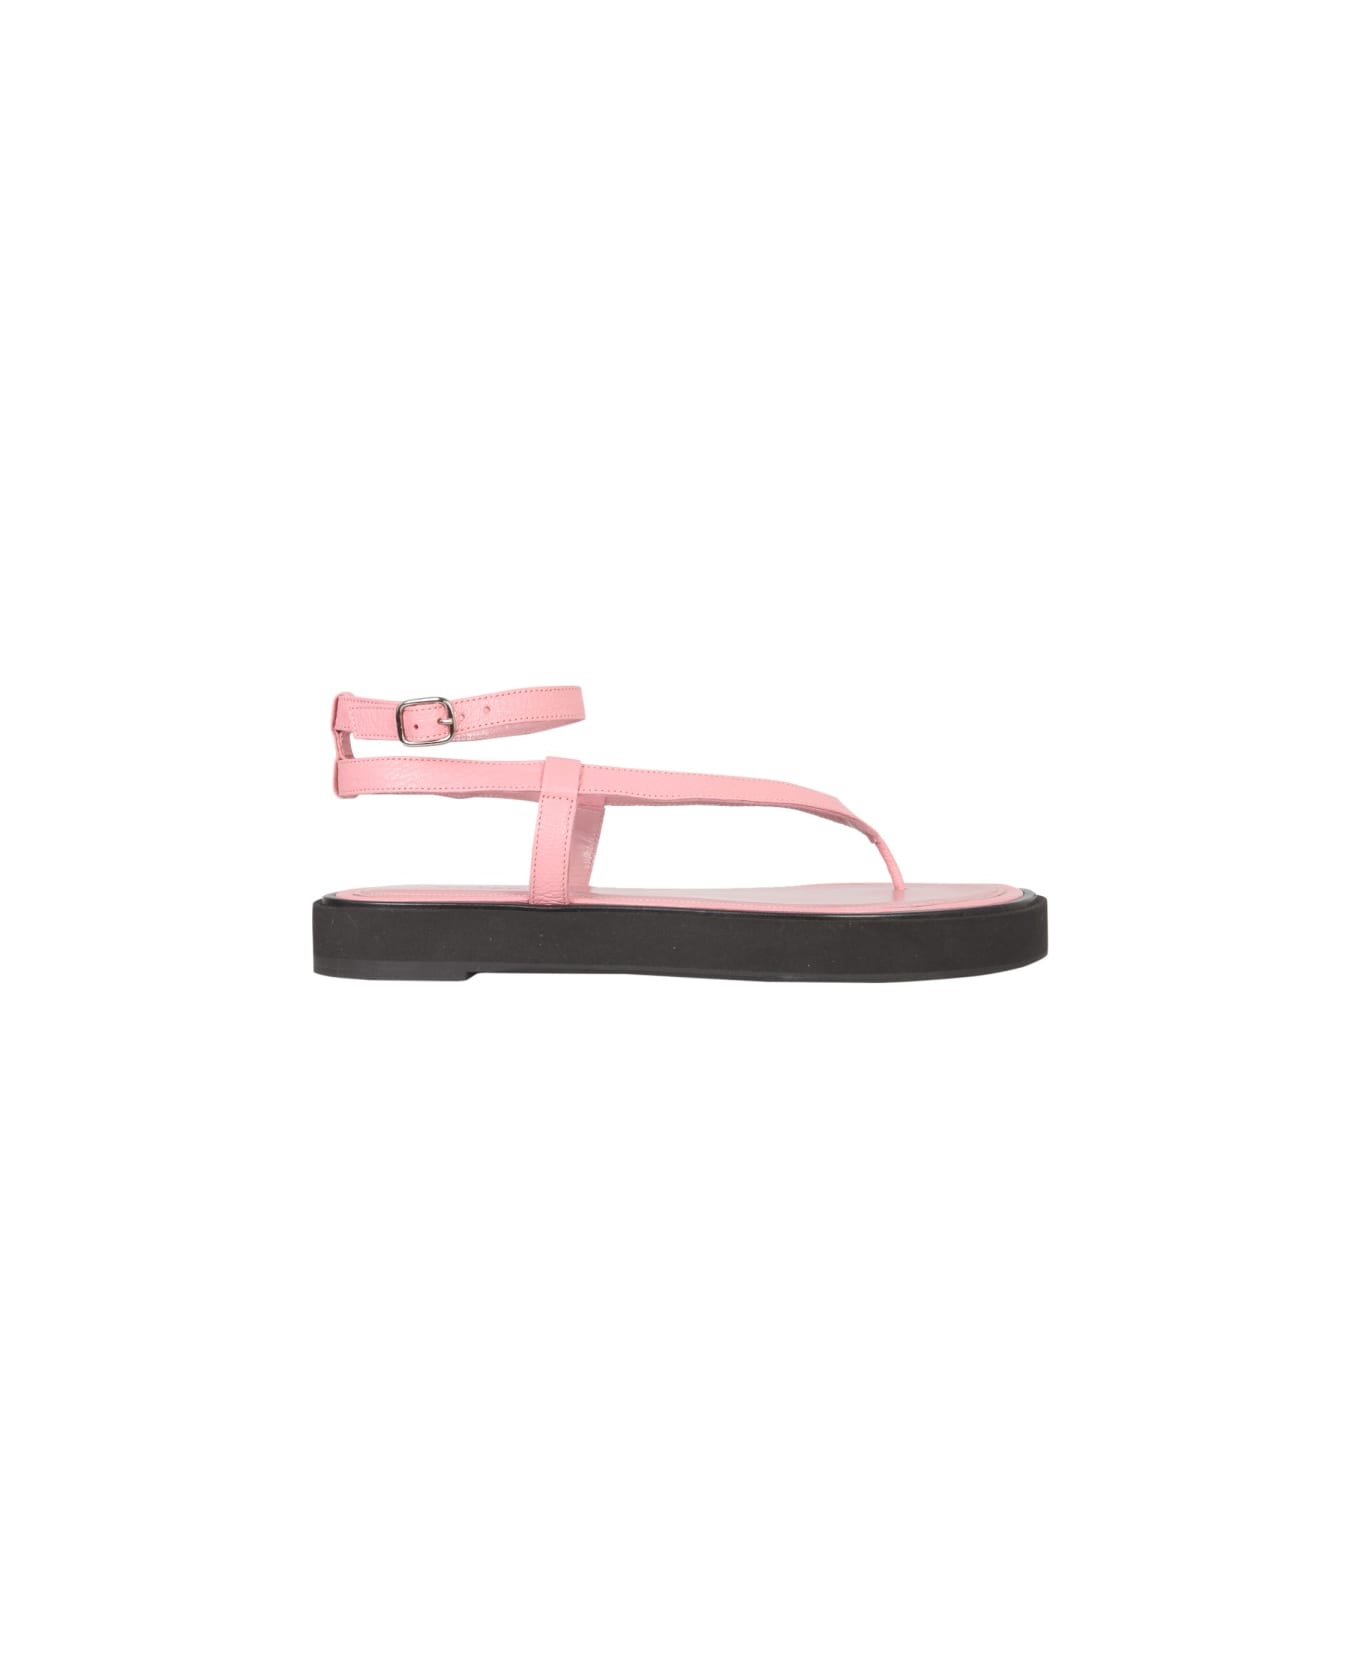 BY FAR Cece Thong Sandals - PINK